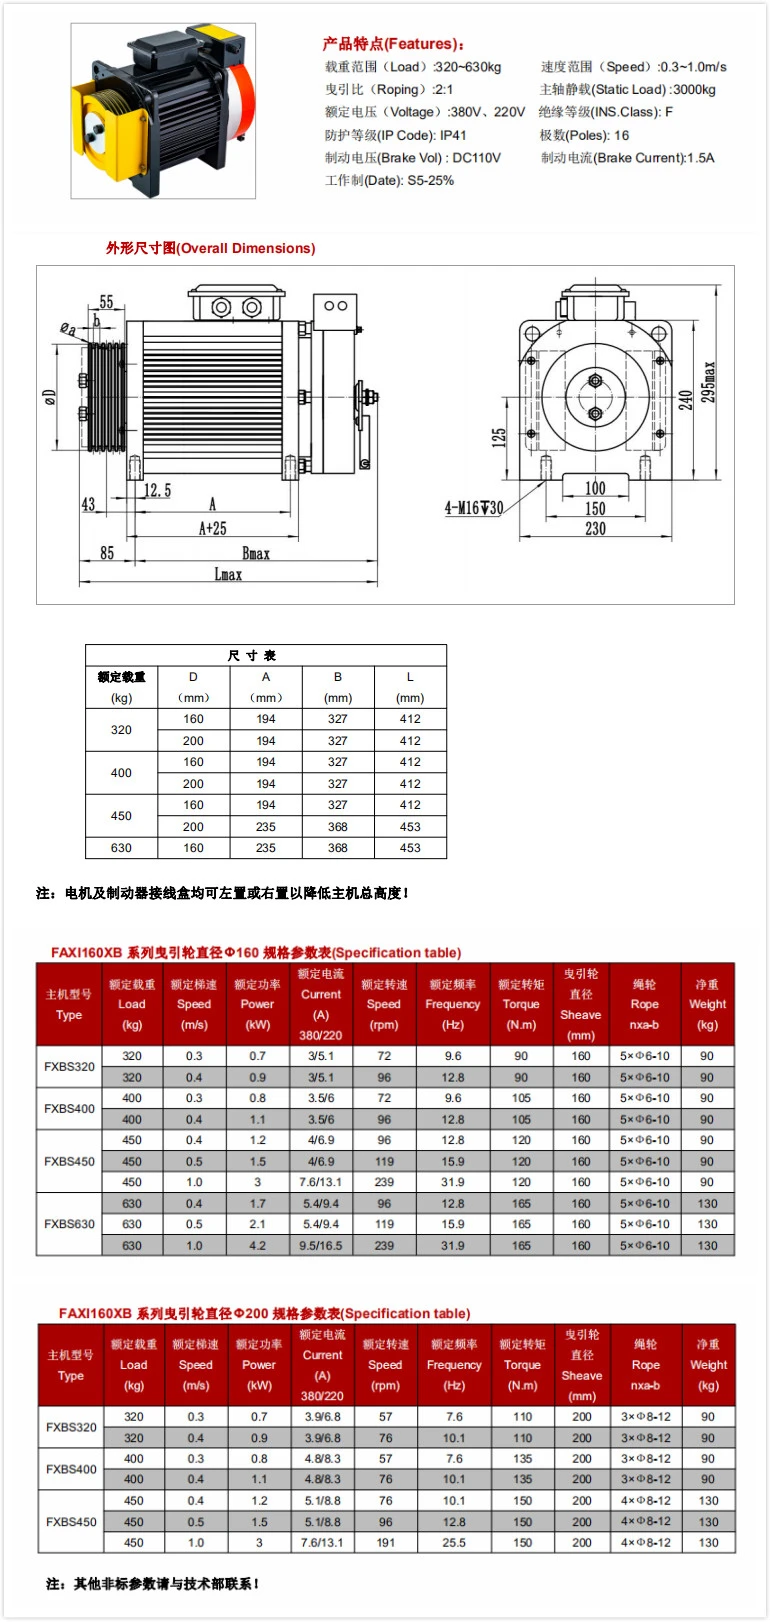 SHANGHAI FAXI GEARLESS STEEL WIRE ROPE ELEVATOR TRACTION MACHINE FAXI160XB SPECIFICATION